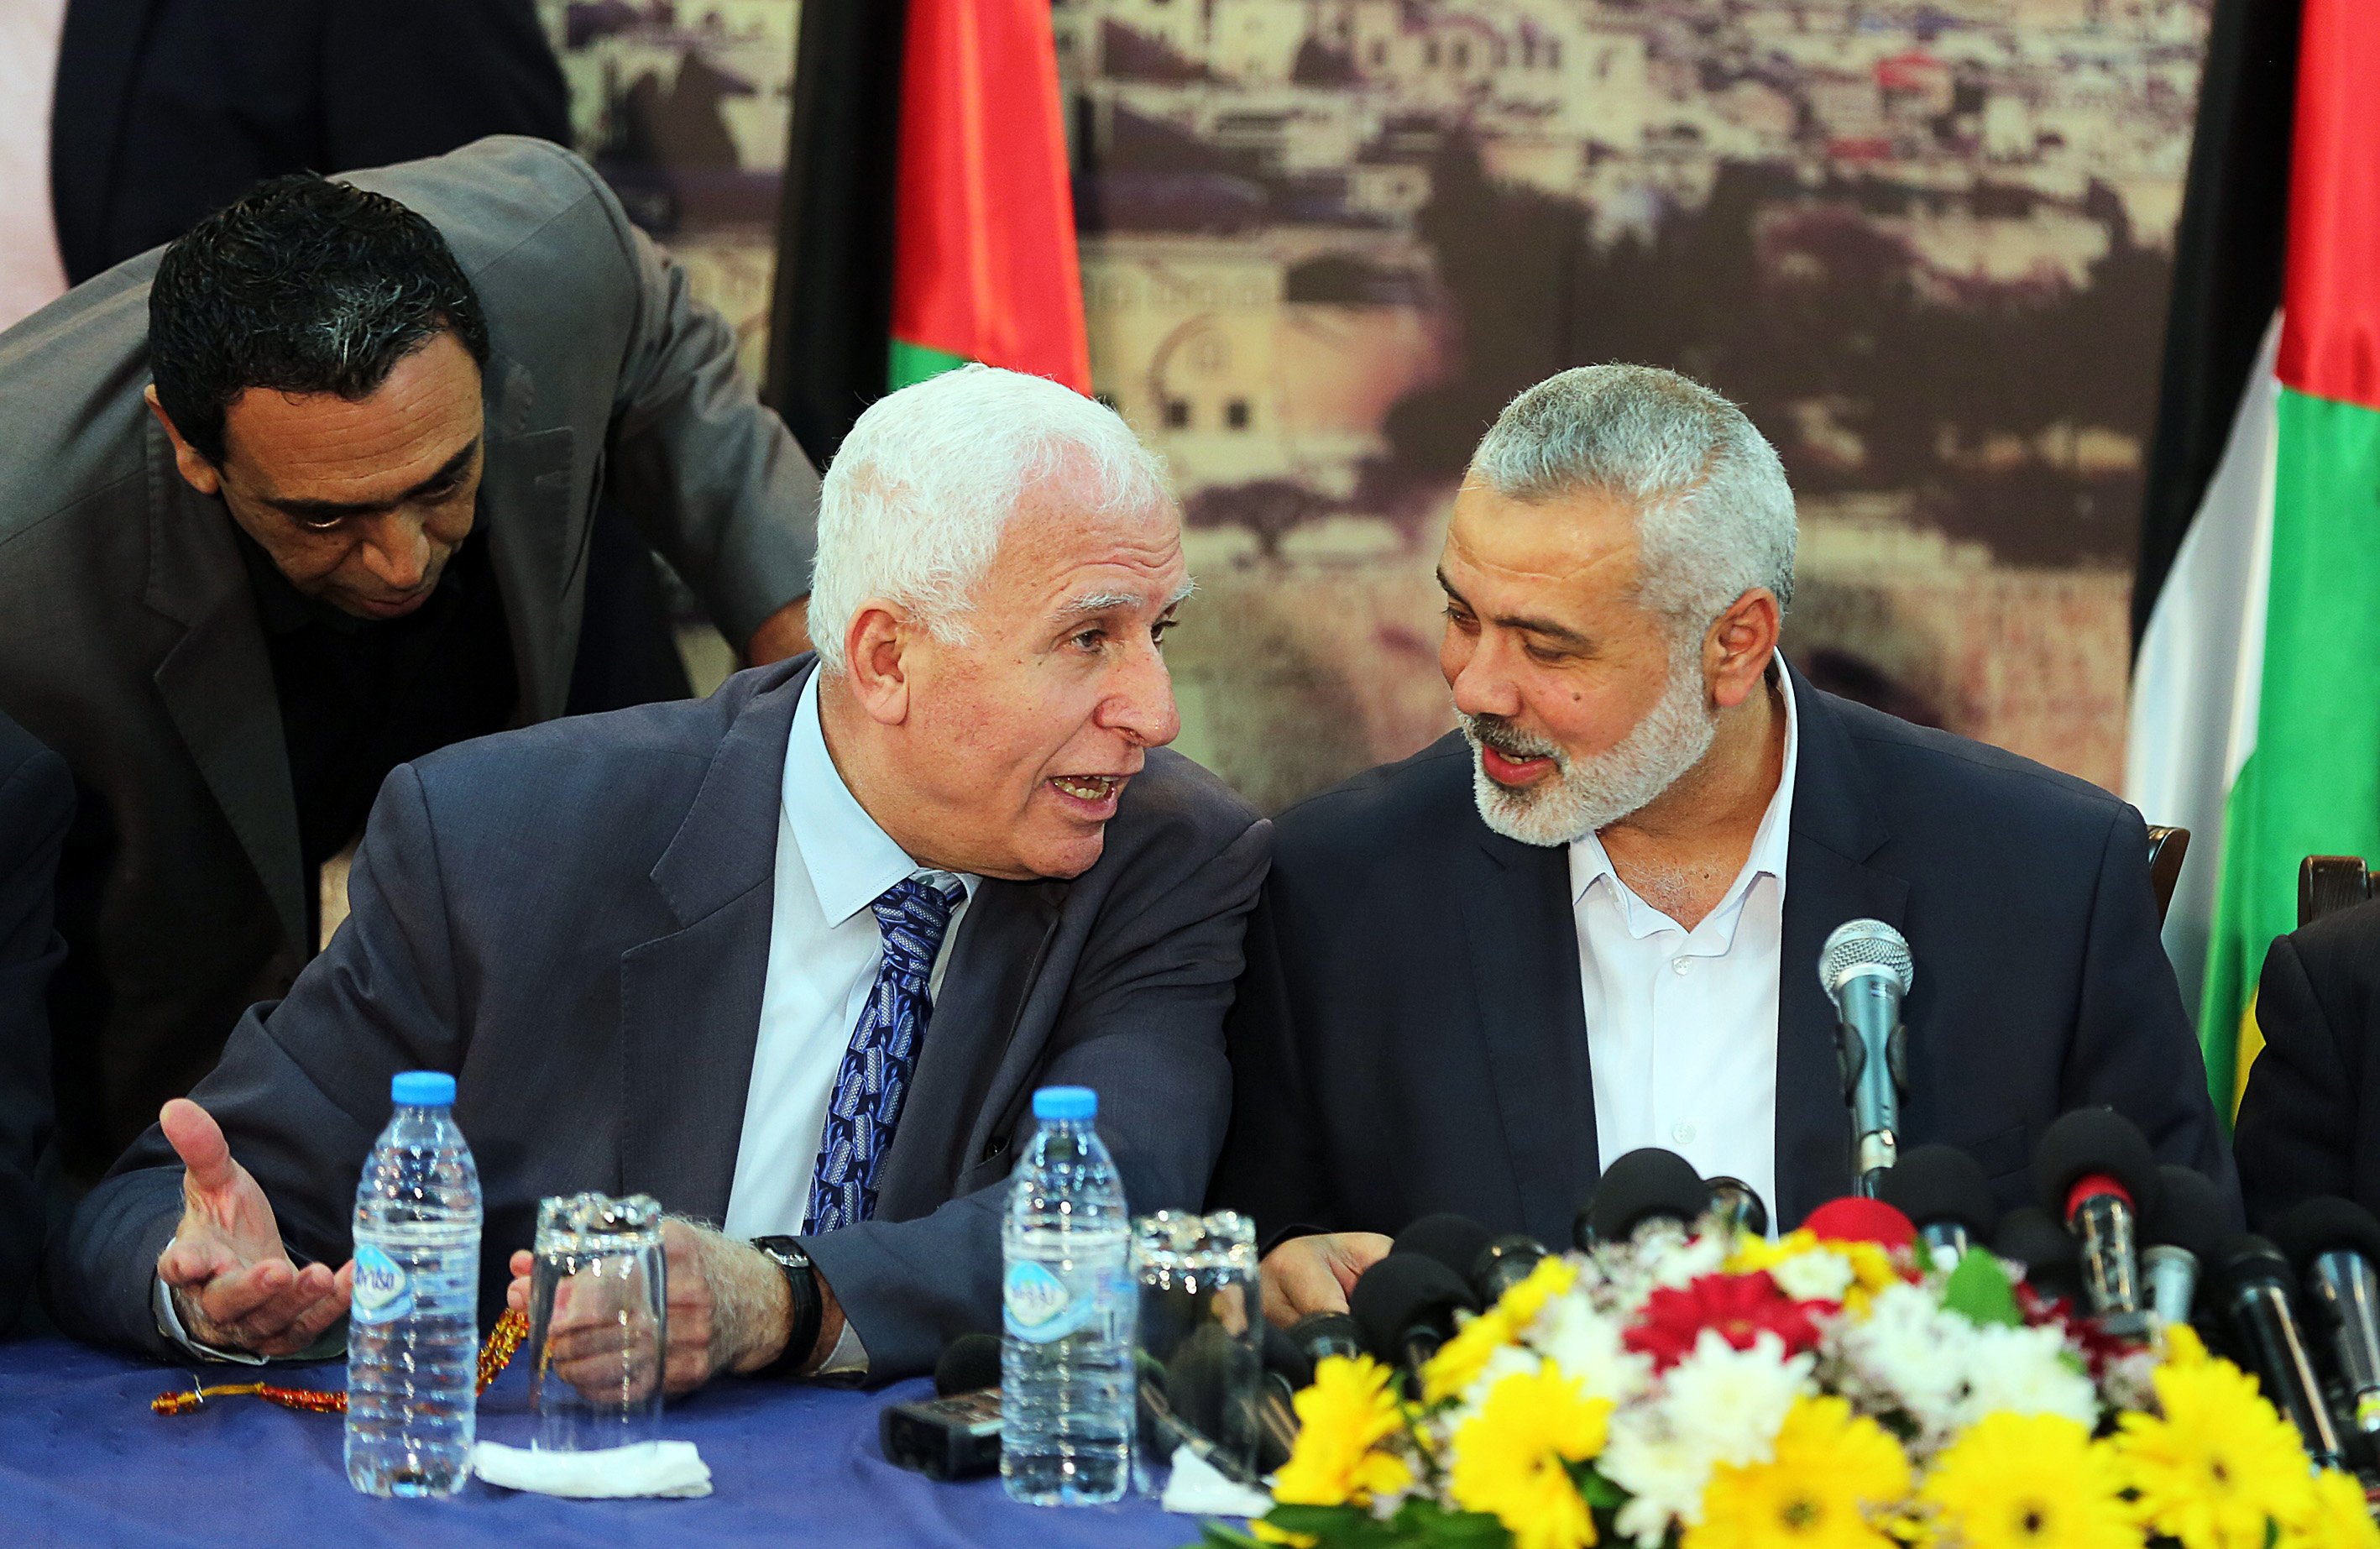 Fatah movement leader Azzam al-Ahmad, left, and Palestinian Prime Minister Ismail Haniyeh speak during a press conference following the meeting to end Palestinian divisions between Fatah and Hamas movement in Gaza City on April 23, 2014 (Mustafa Hassona—Anadolu Agency/Getty Images)